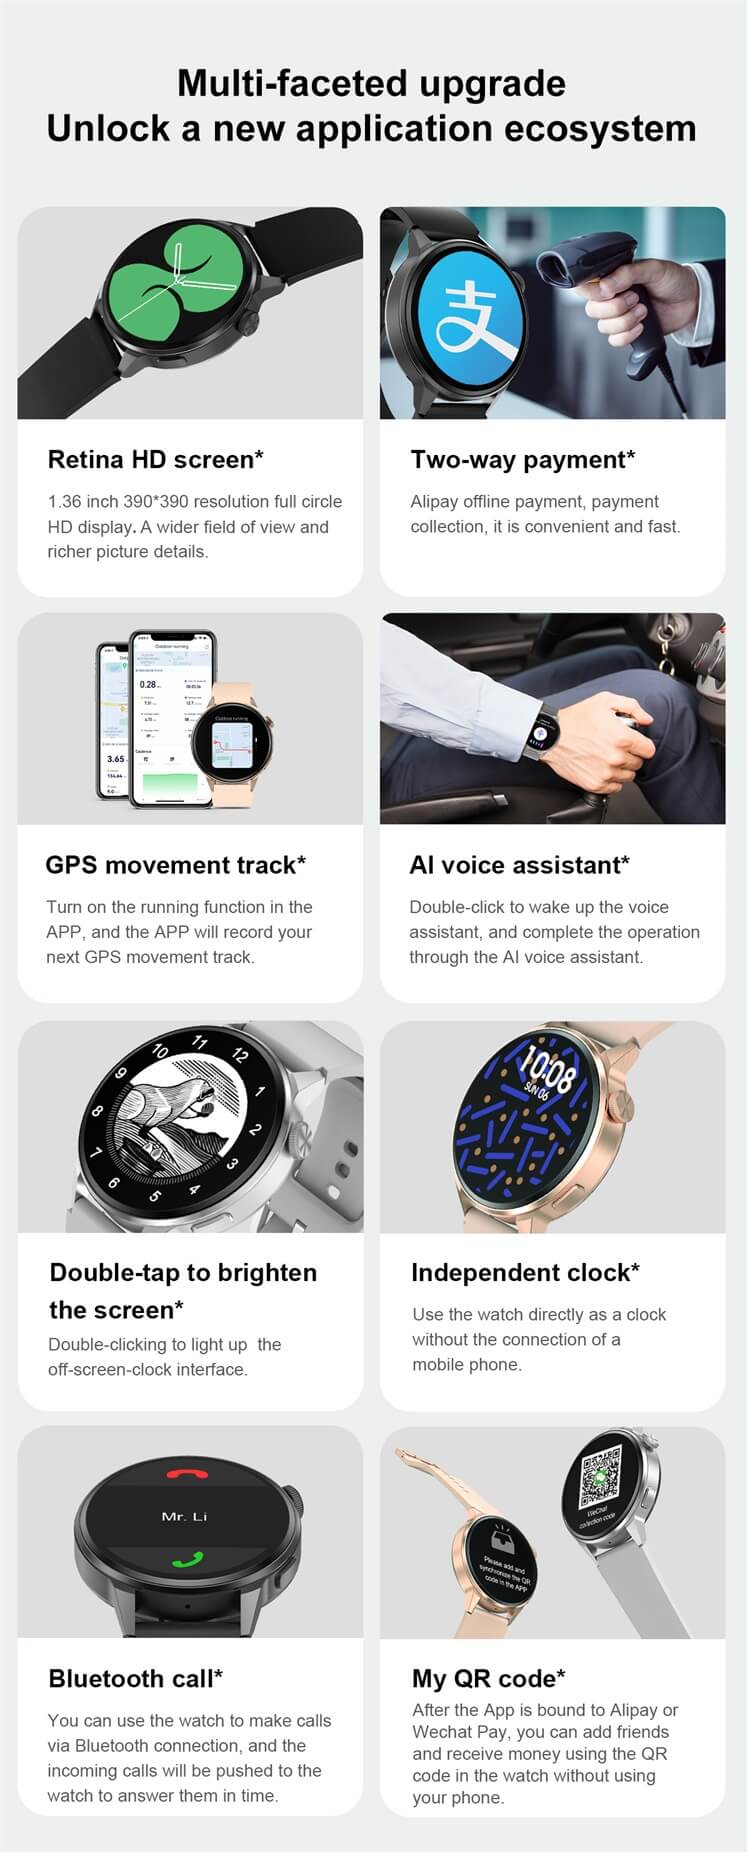 DT4 GPS Motion Tracking Wireless Charger Smart Watches-Shenzhen Shengye Technology Co.,Ltd